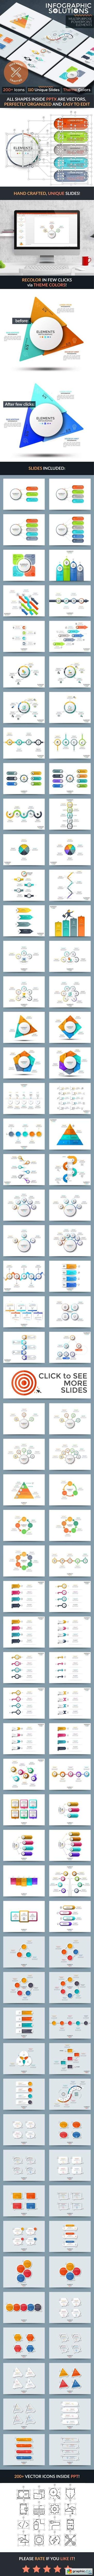 Infographic Solutions. Powerpoint Template